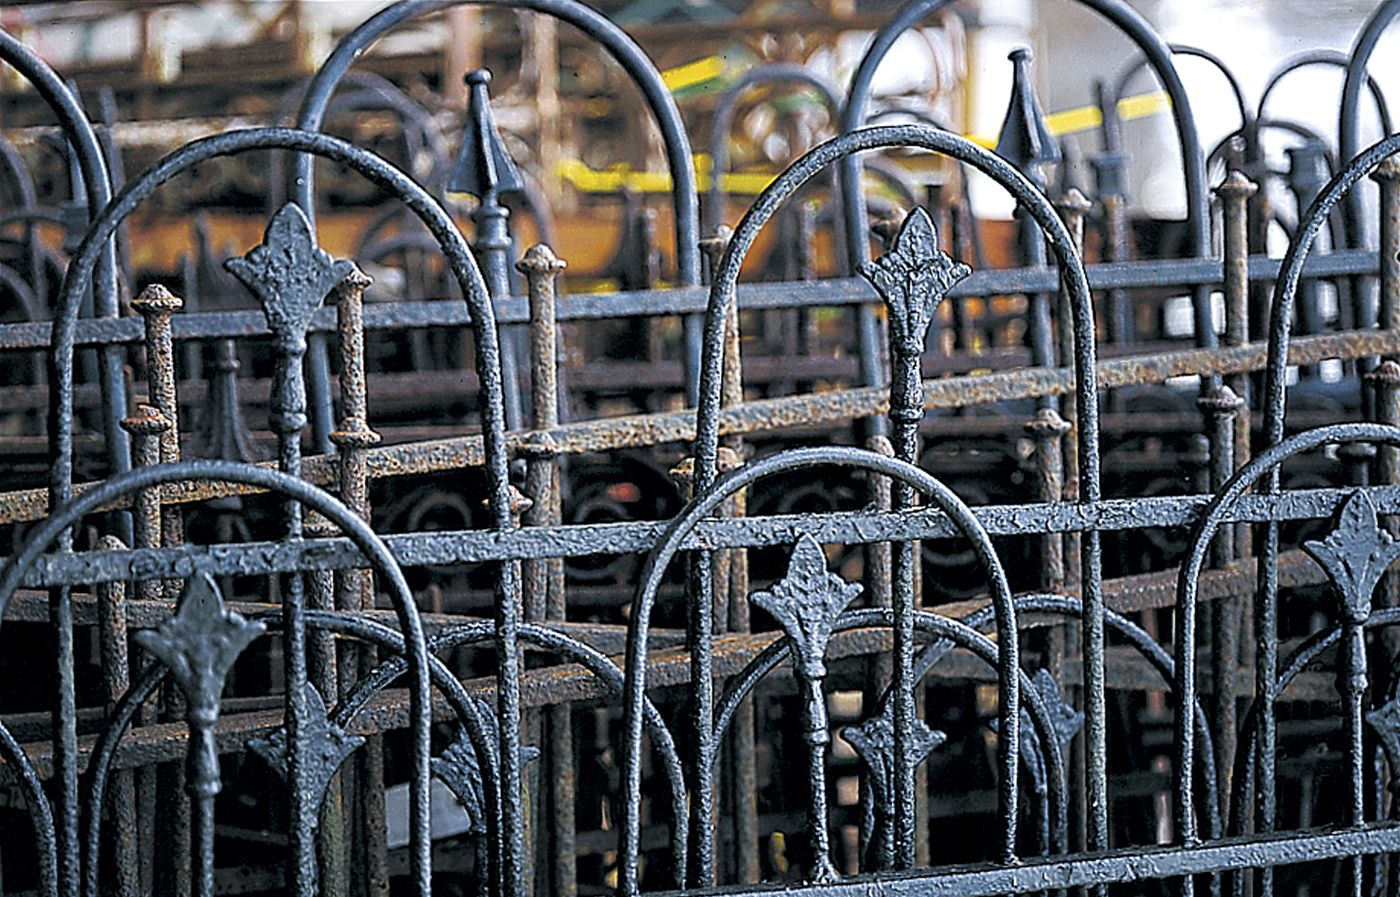 wrought iron material